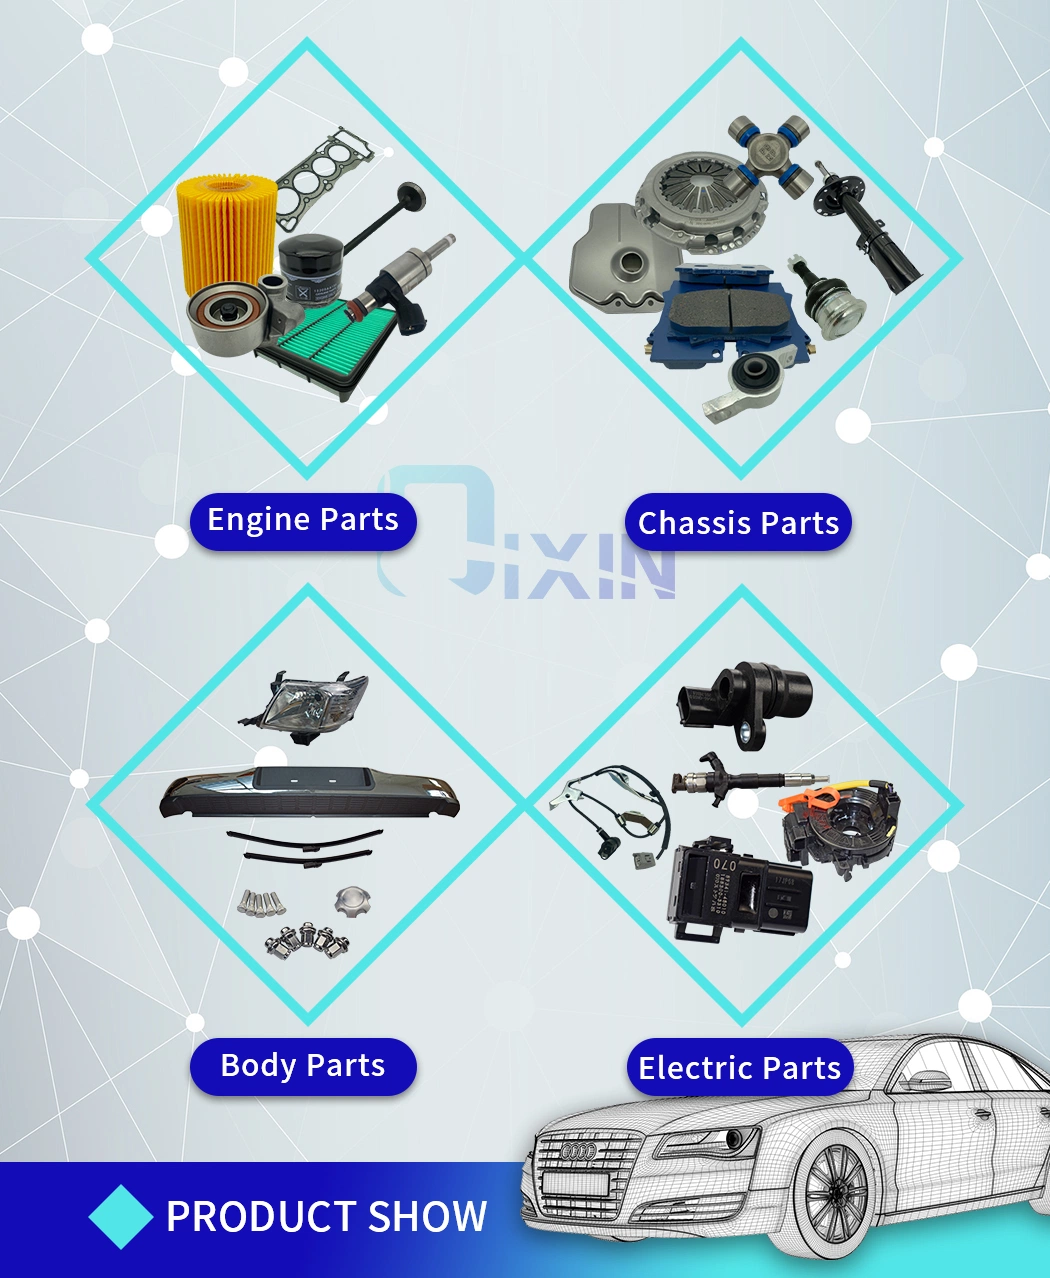 OEM 43310-60050 Car Auto Suspension Parts-Ball Joints From China Manufacturer